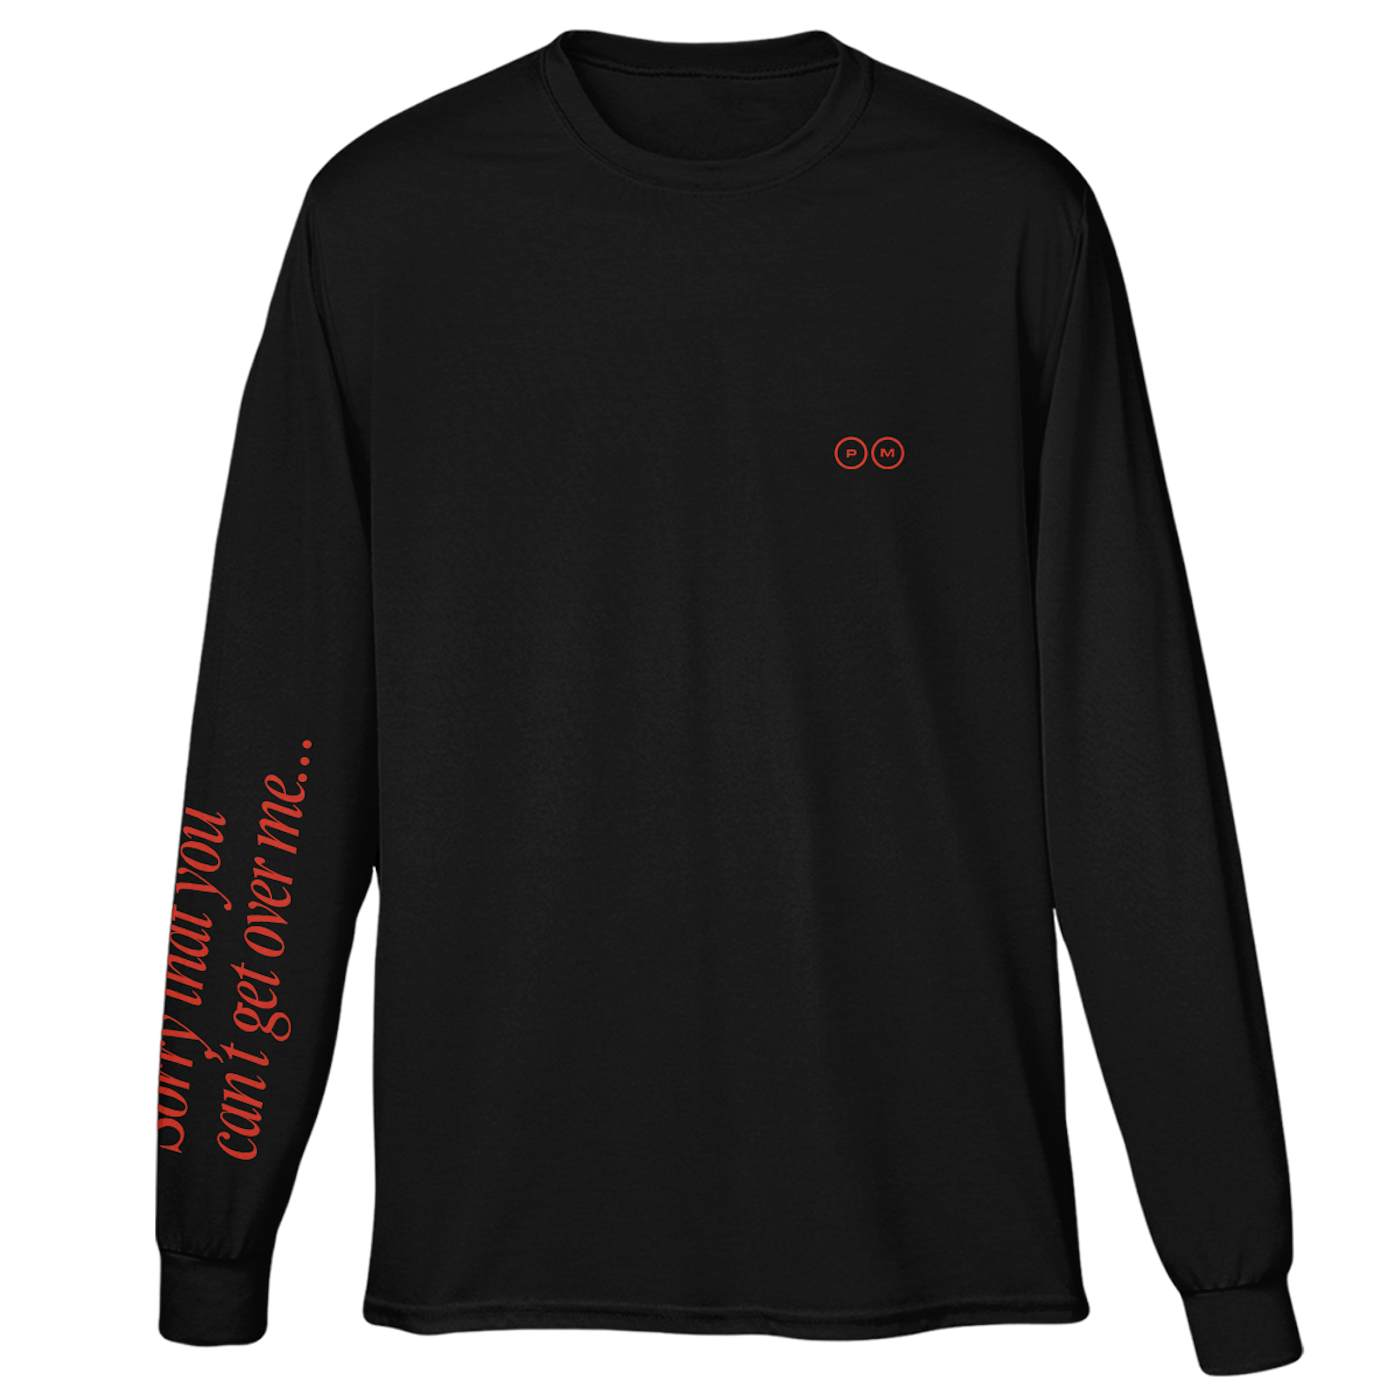 Post Malone Over Me Longsleeve